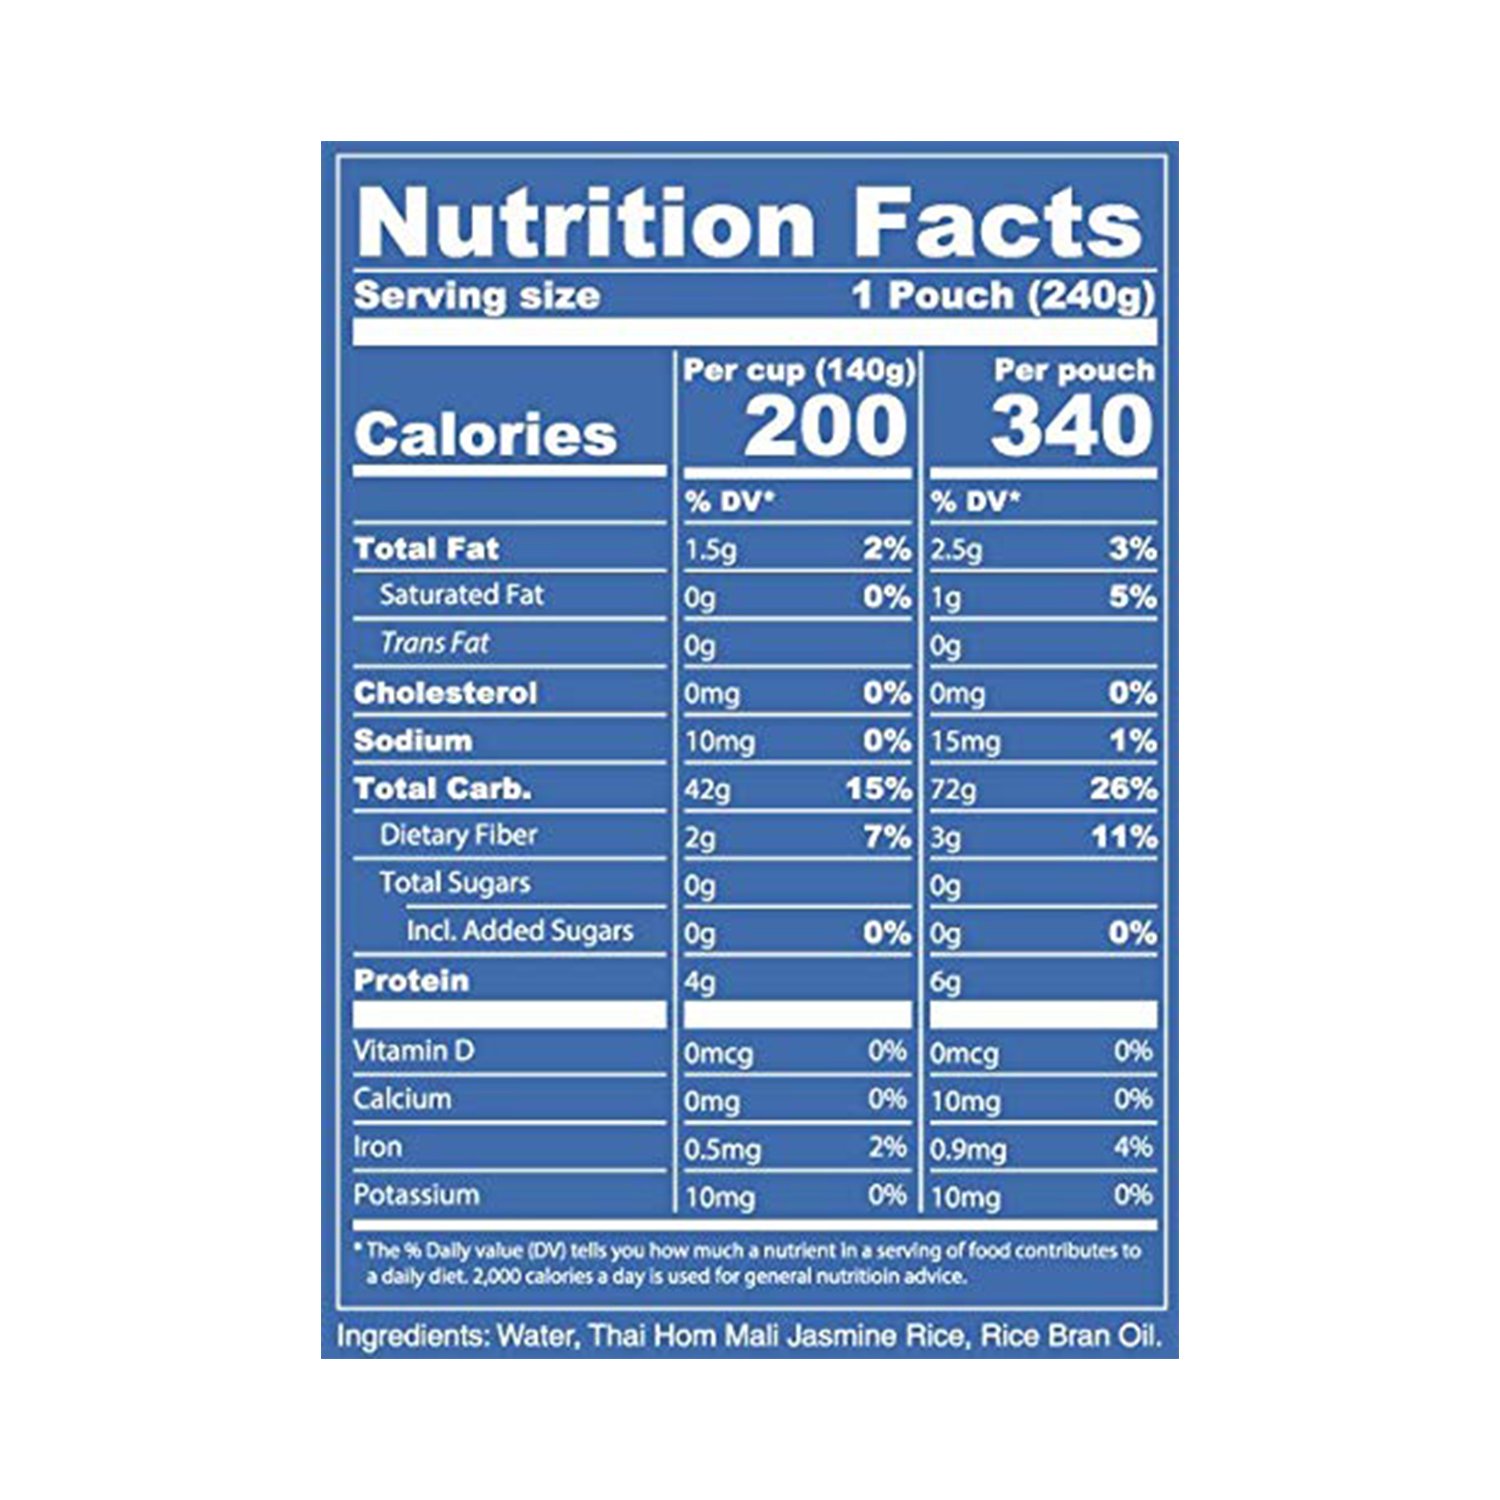 Nutrition Facts.jpg